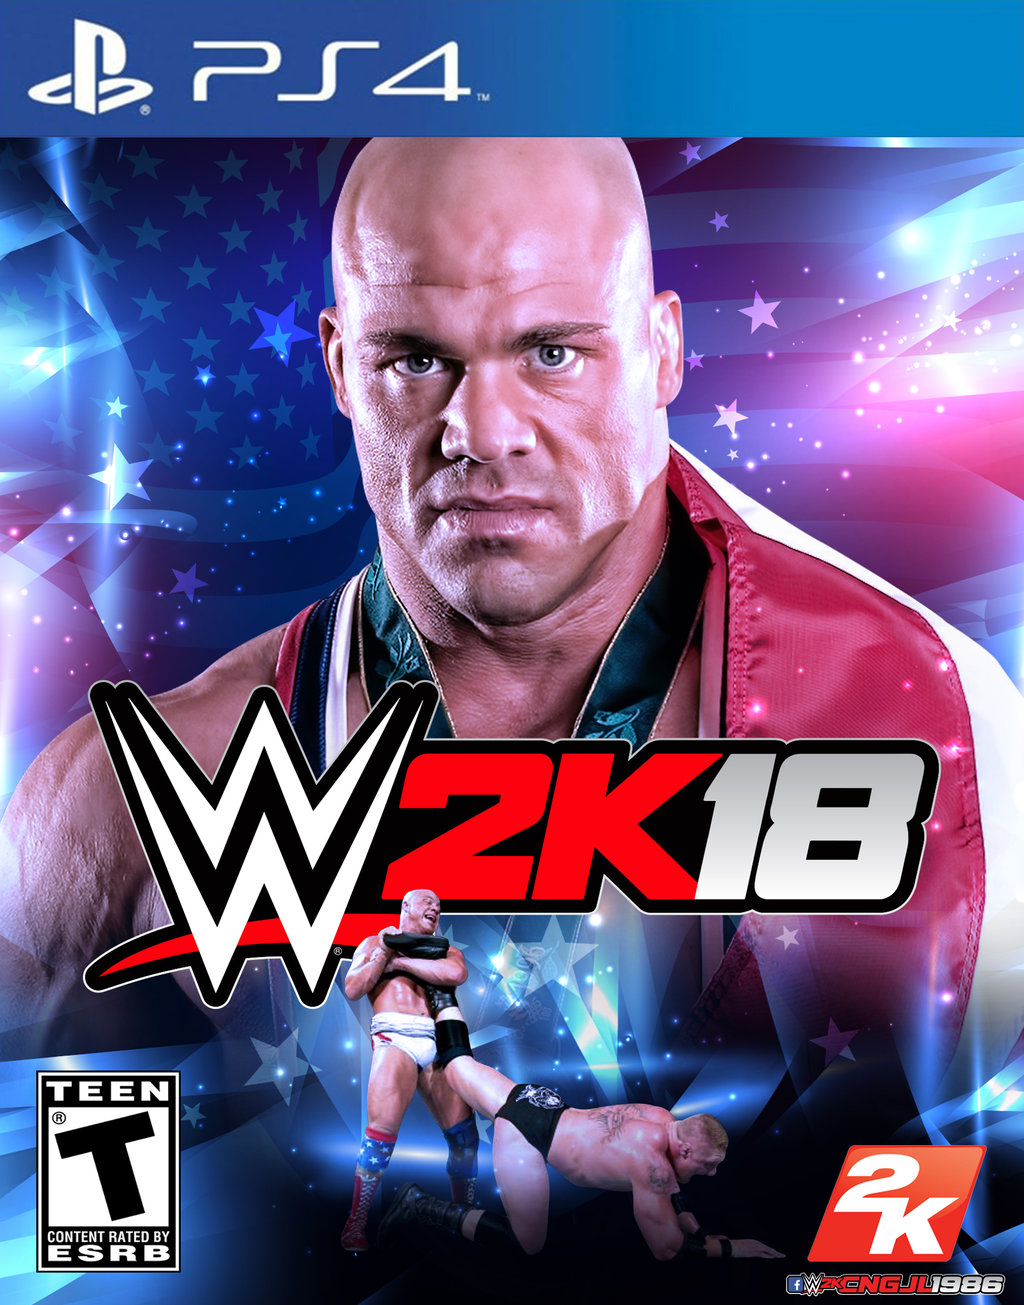 download wwe 2k18 ps3 for free